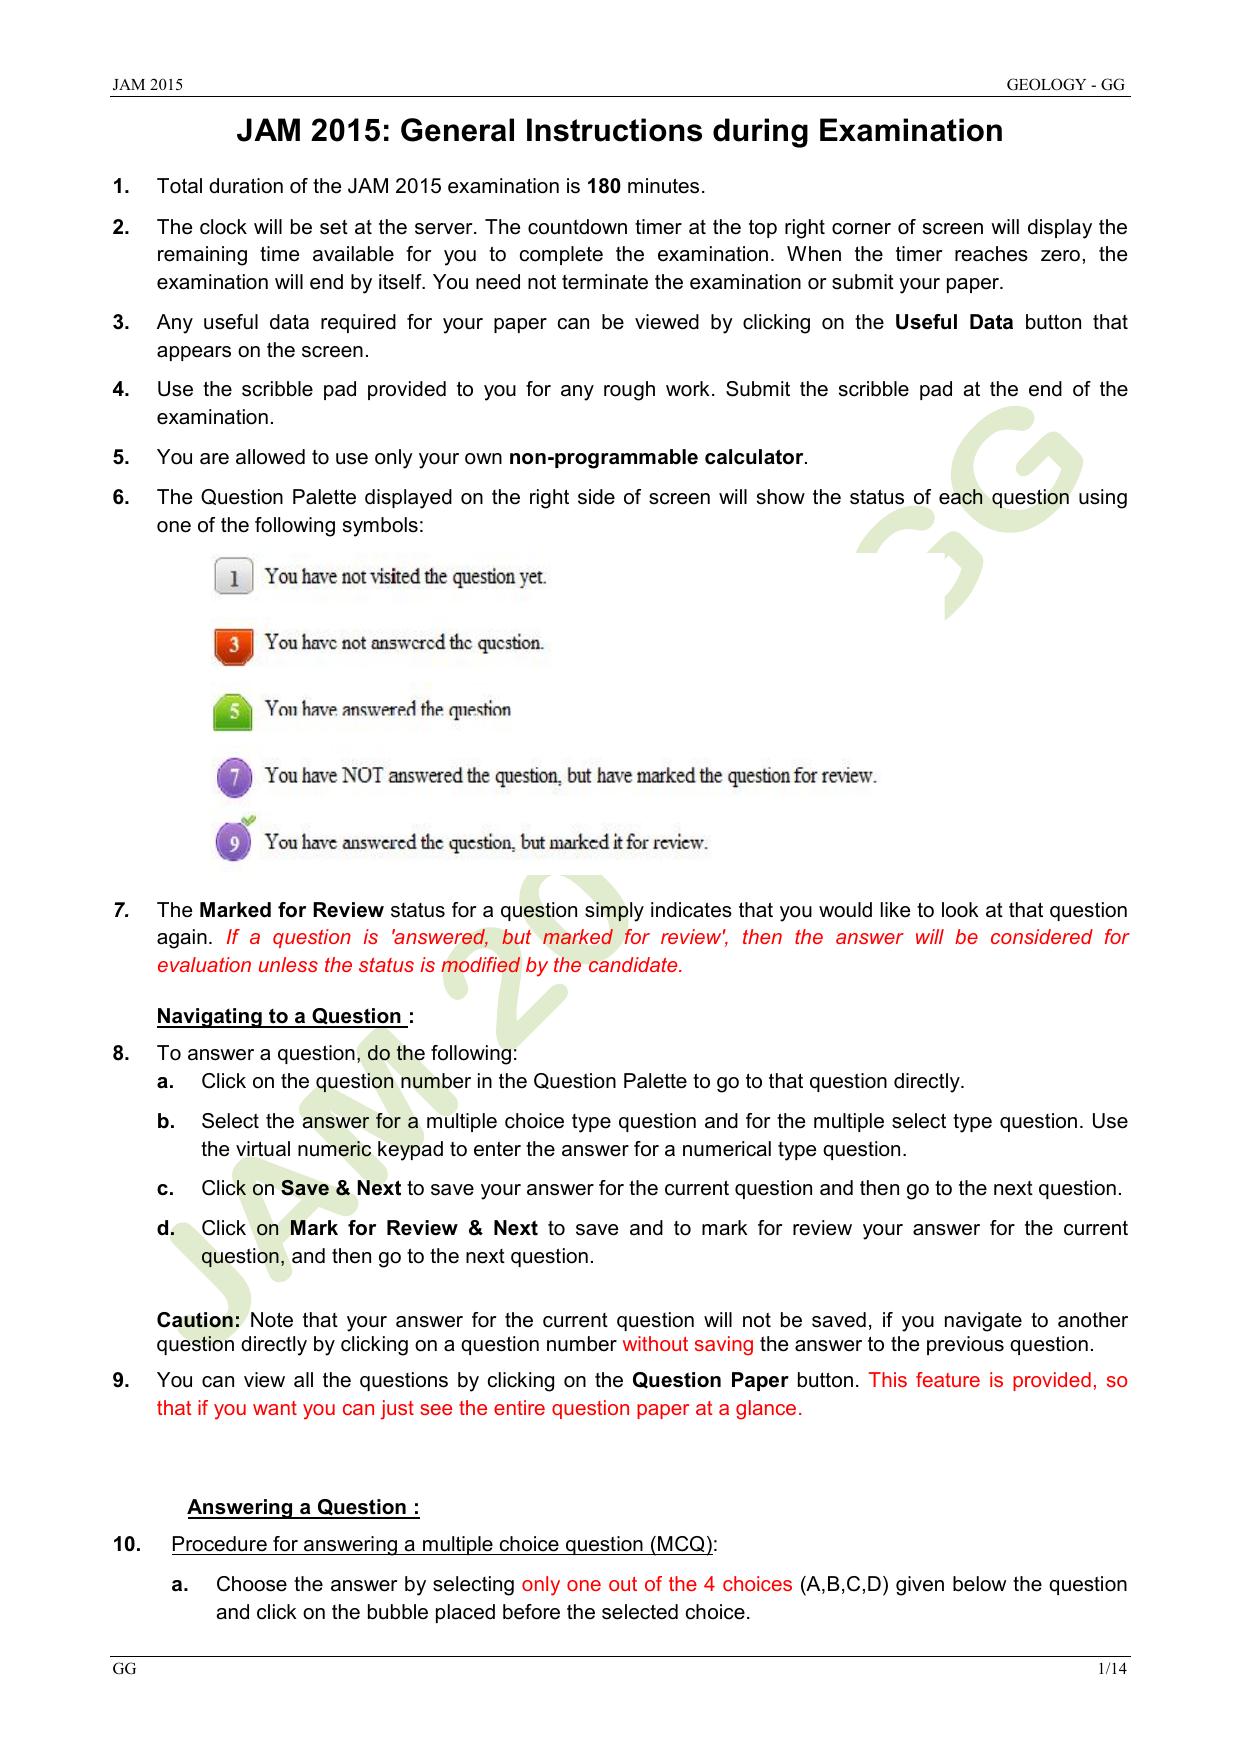 JAM 2015: GG Question Paper - Page 1